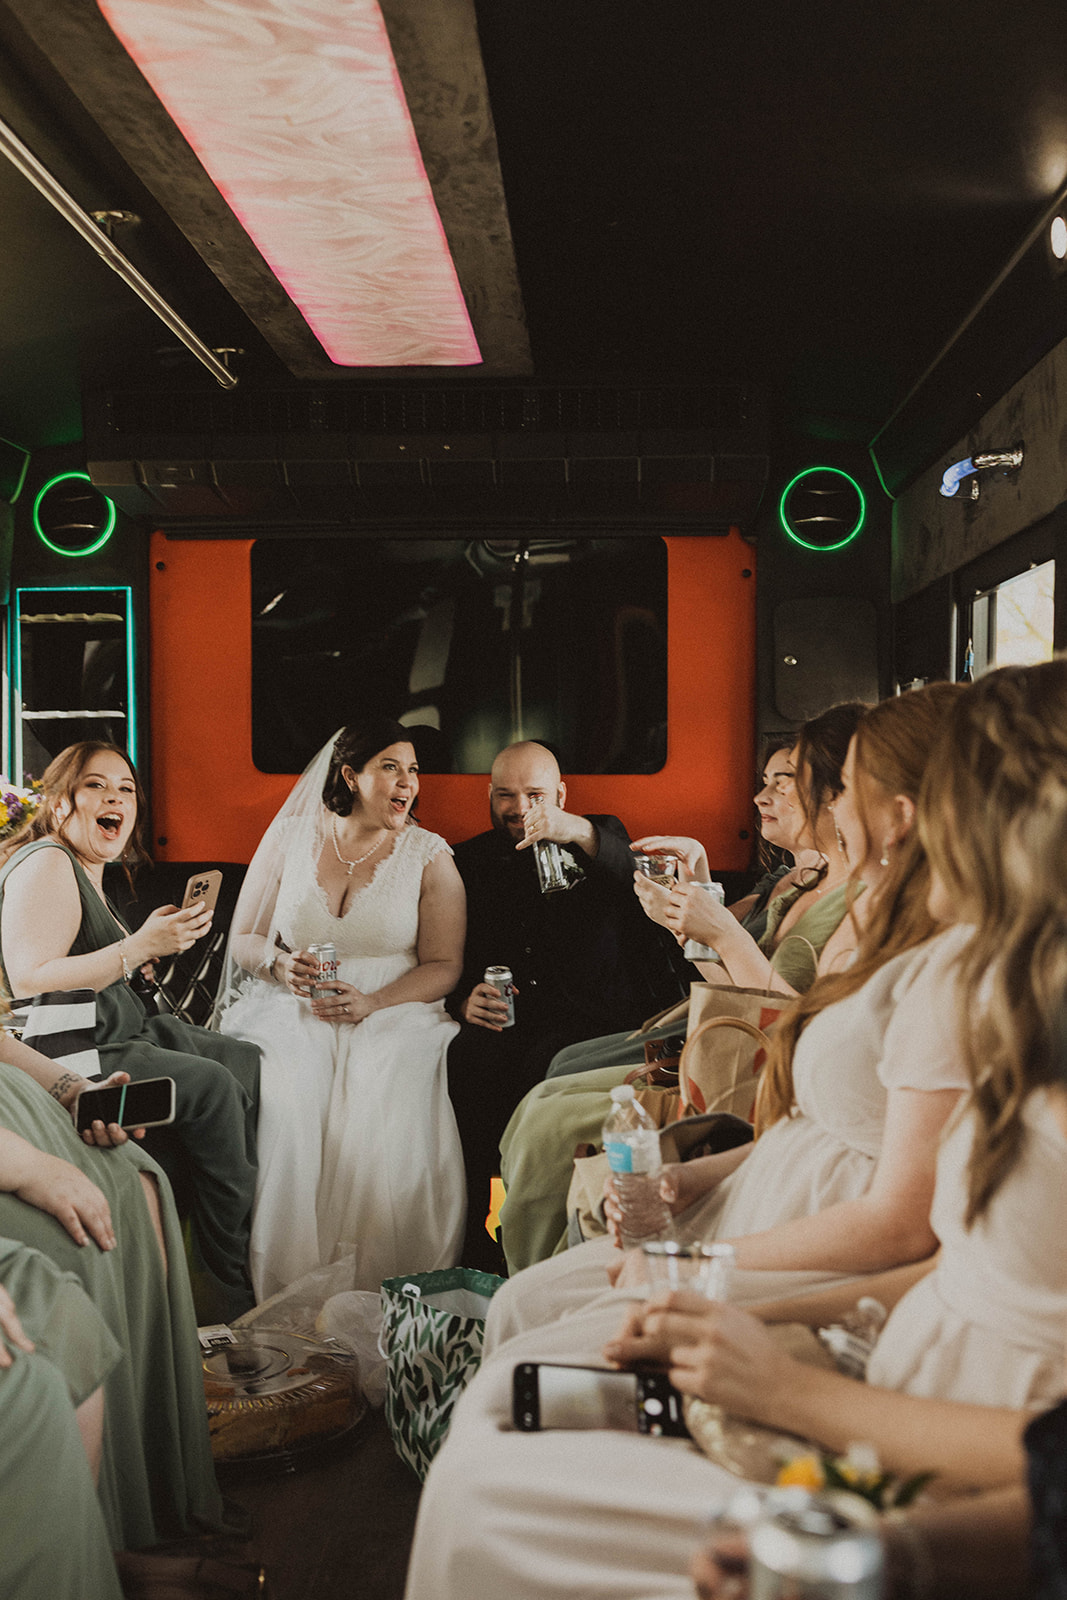 The wedding party rides the party bus together!